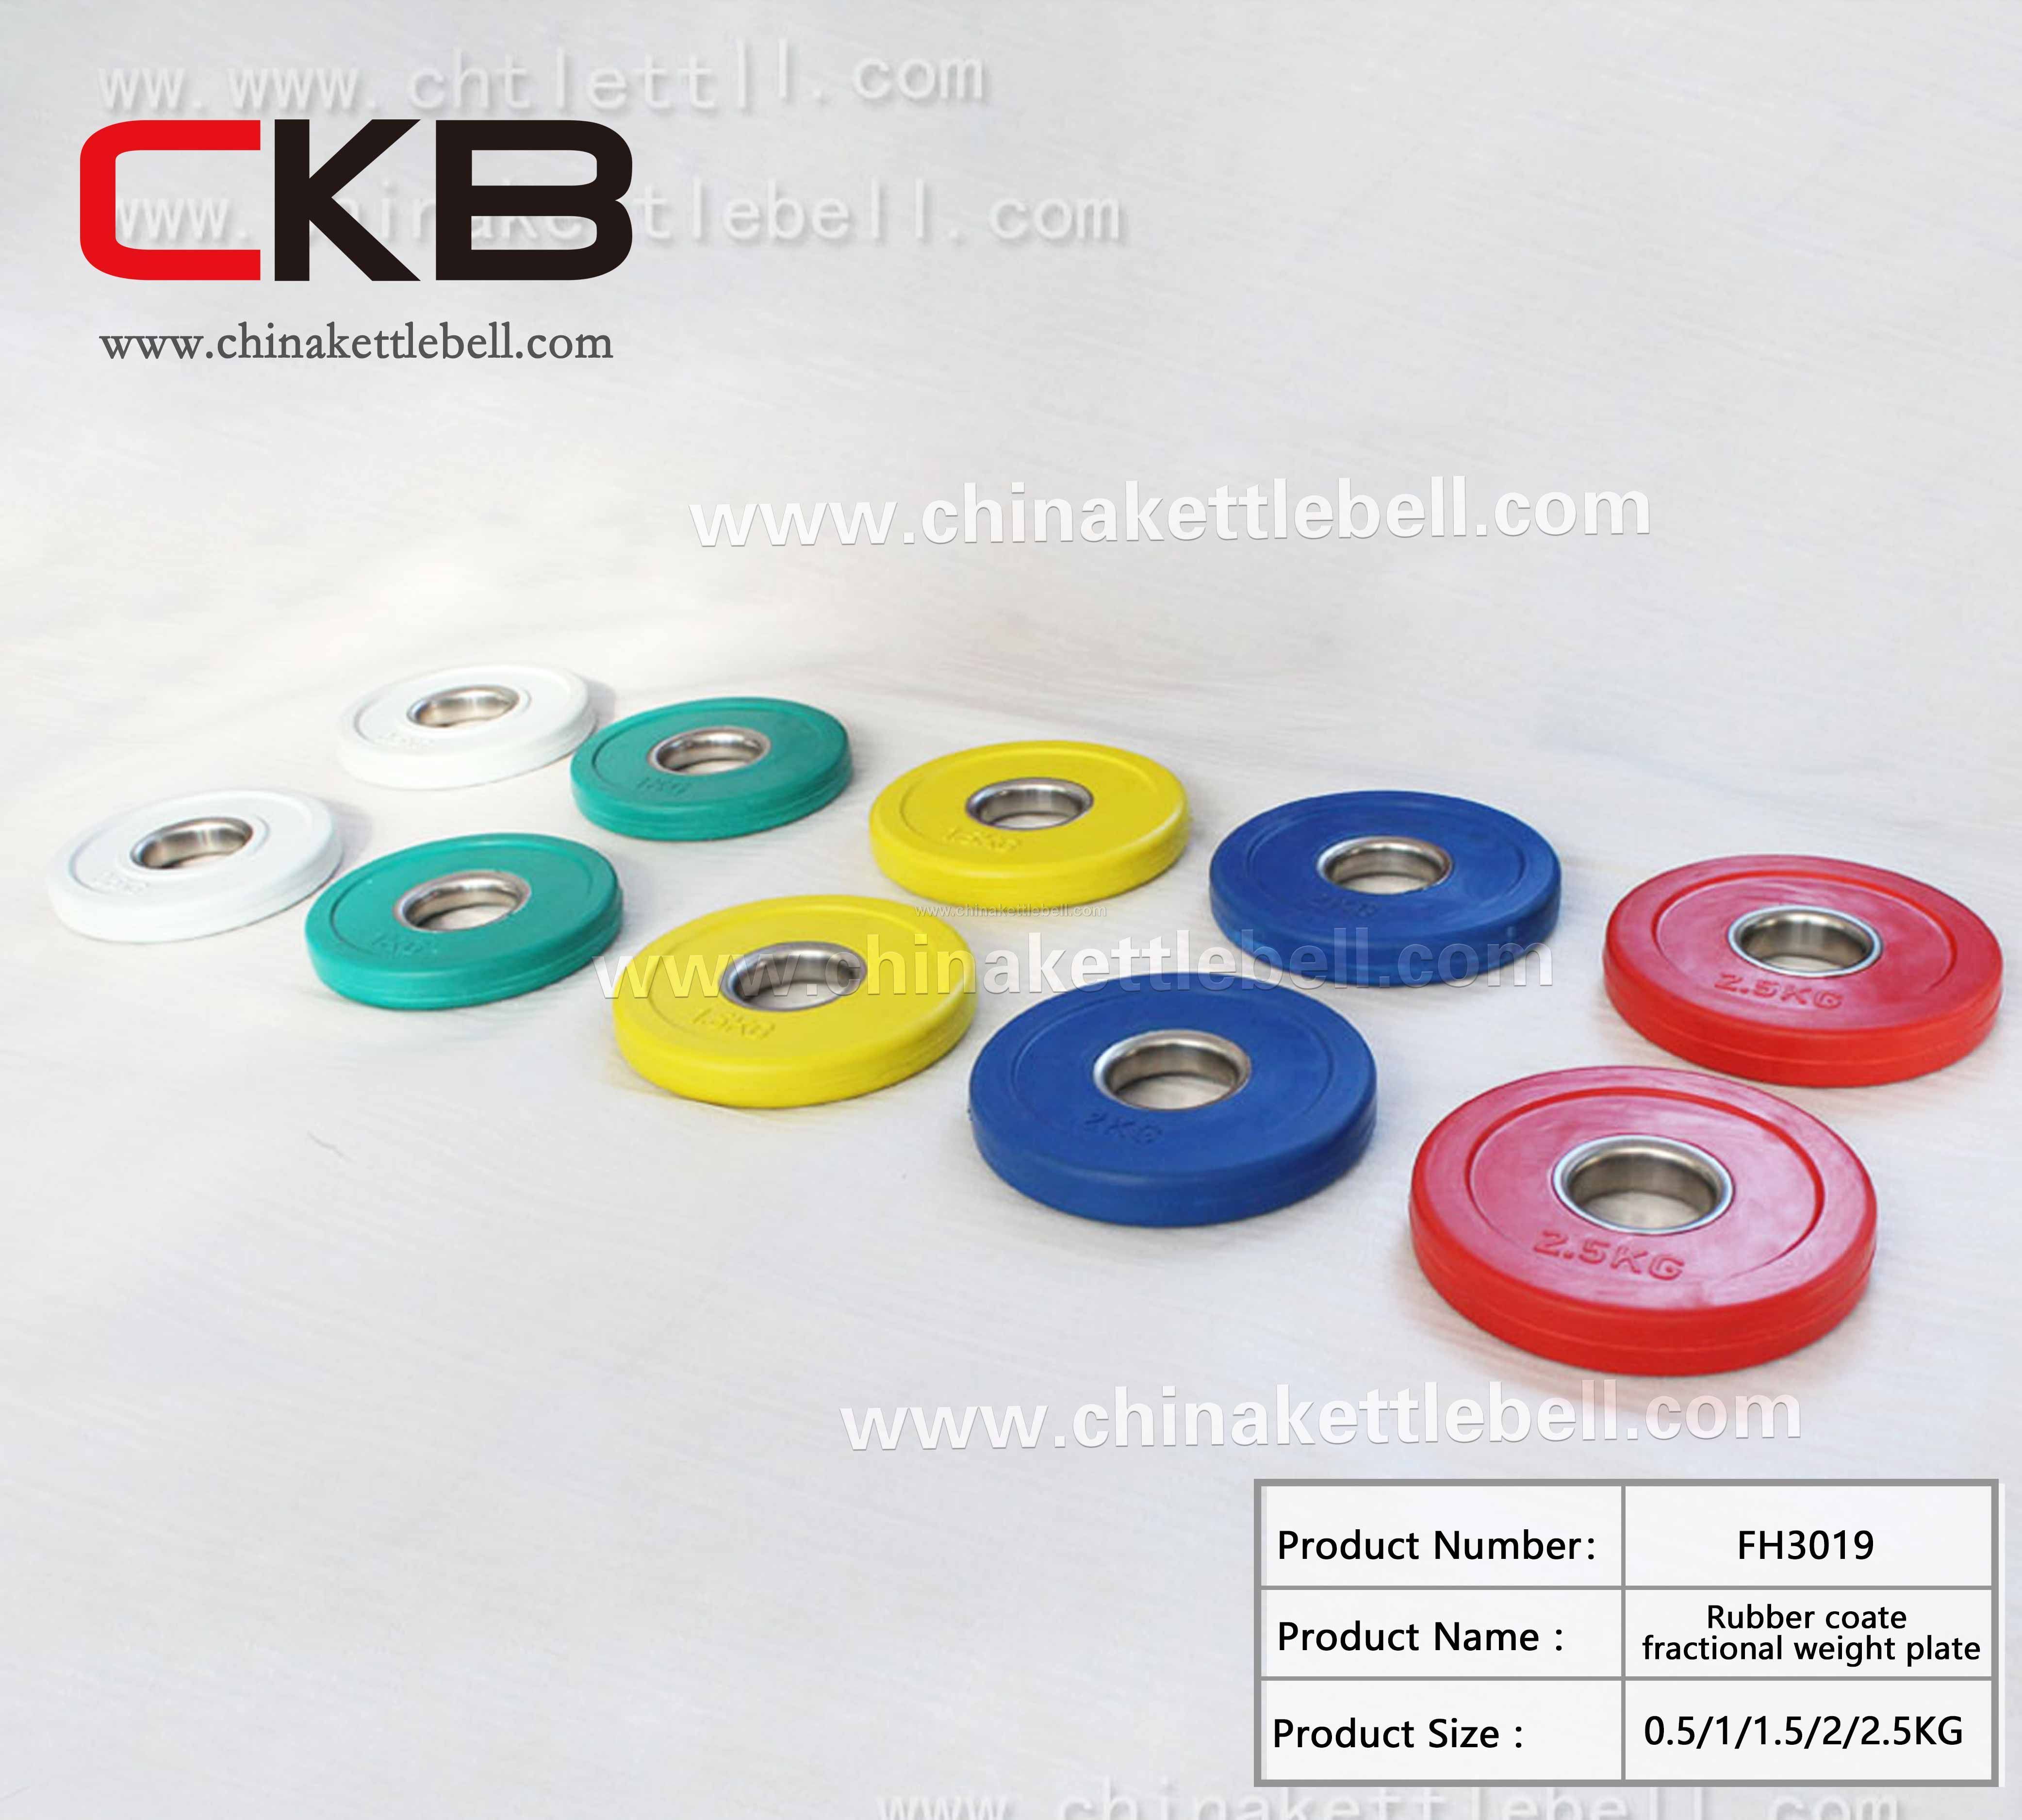 Rubber coated fractional weight plate